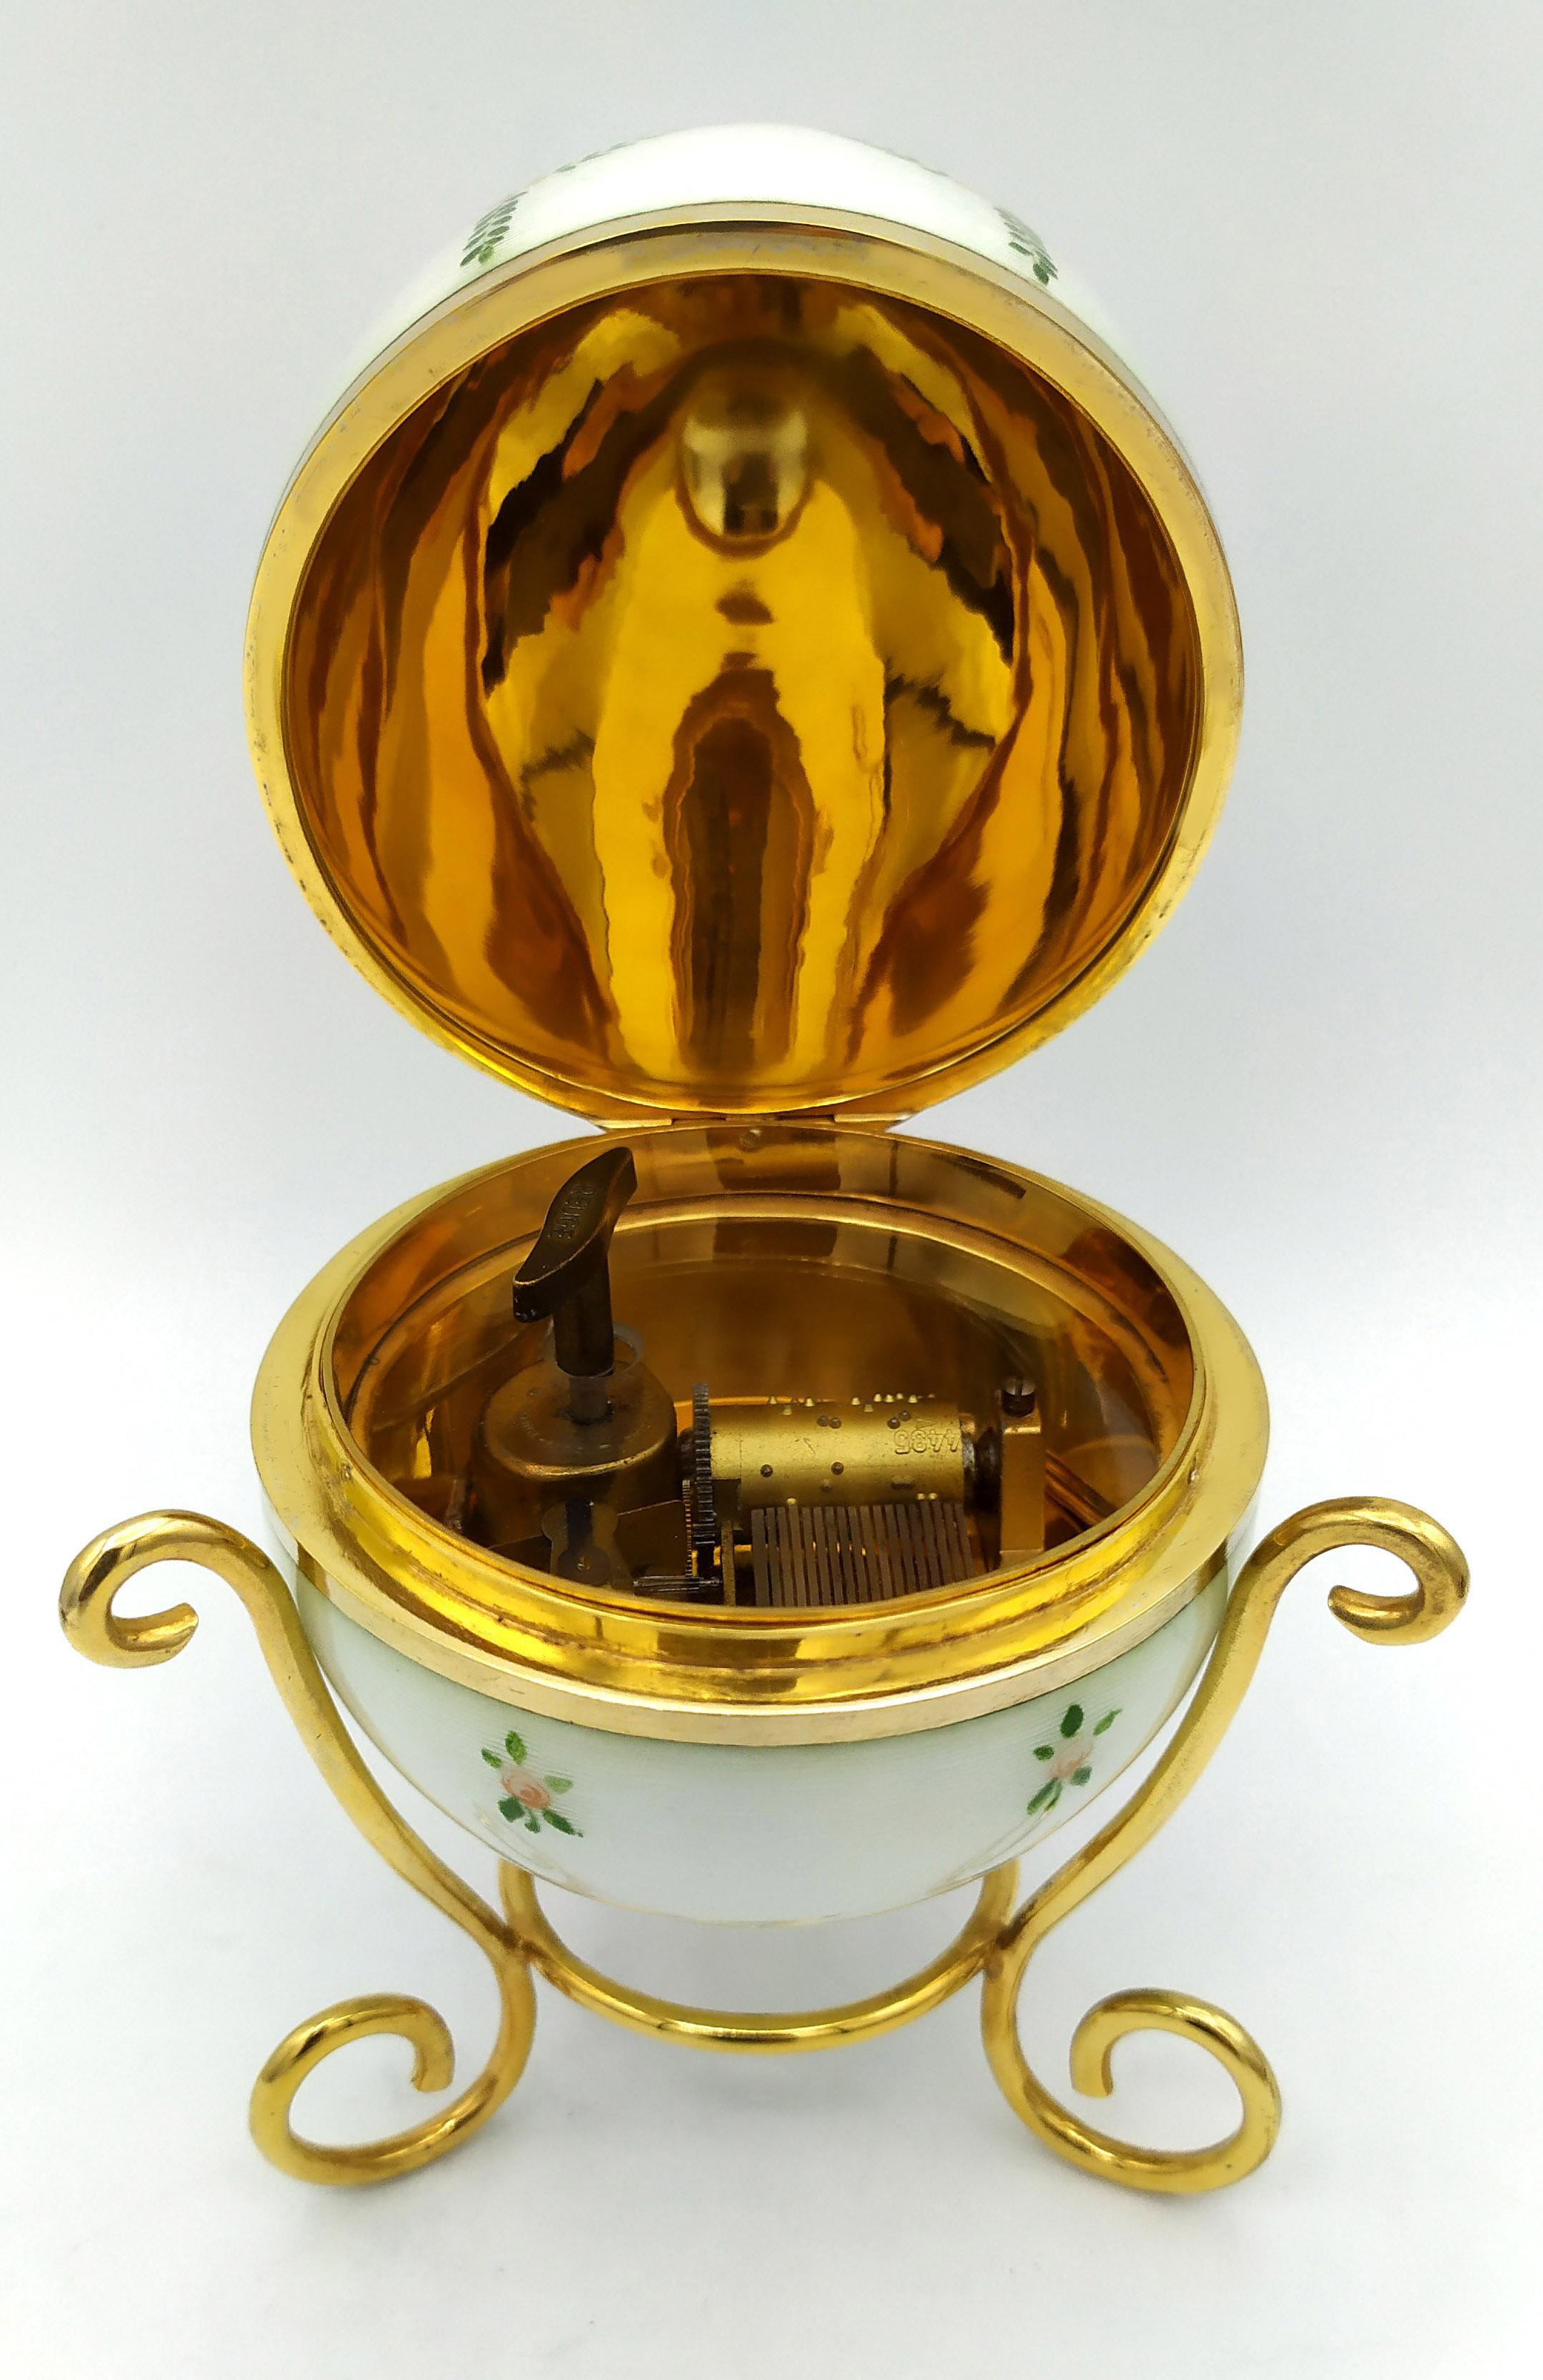 Italian Egg “music box” mechanism by the Swiss Maison Reuge Sterling Silver Salimbeni  For Sale